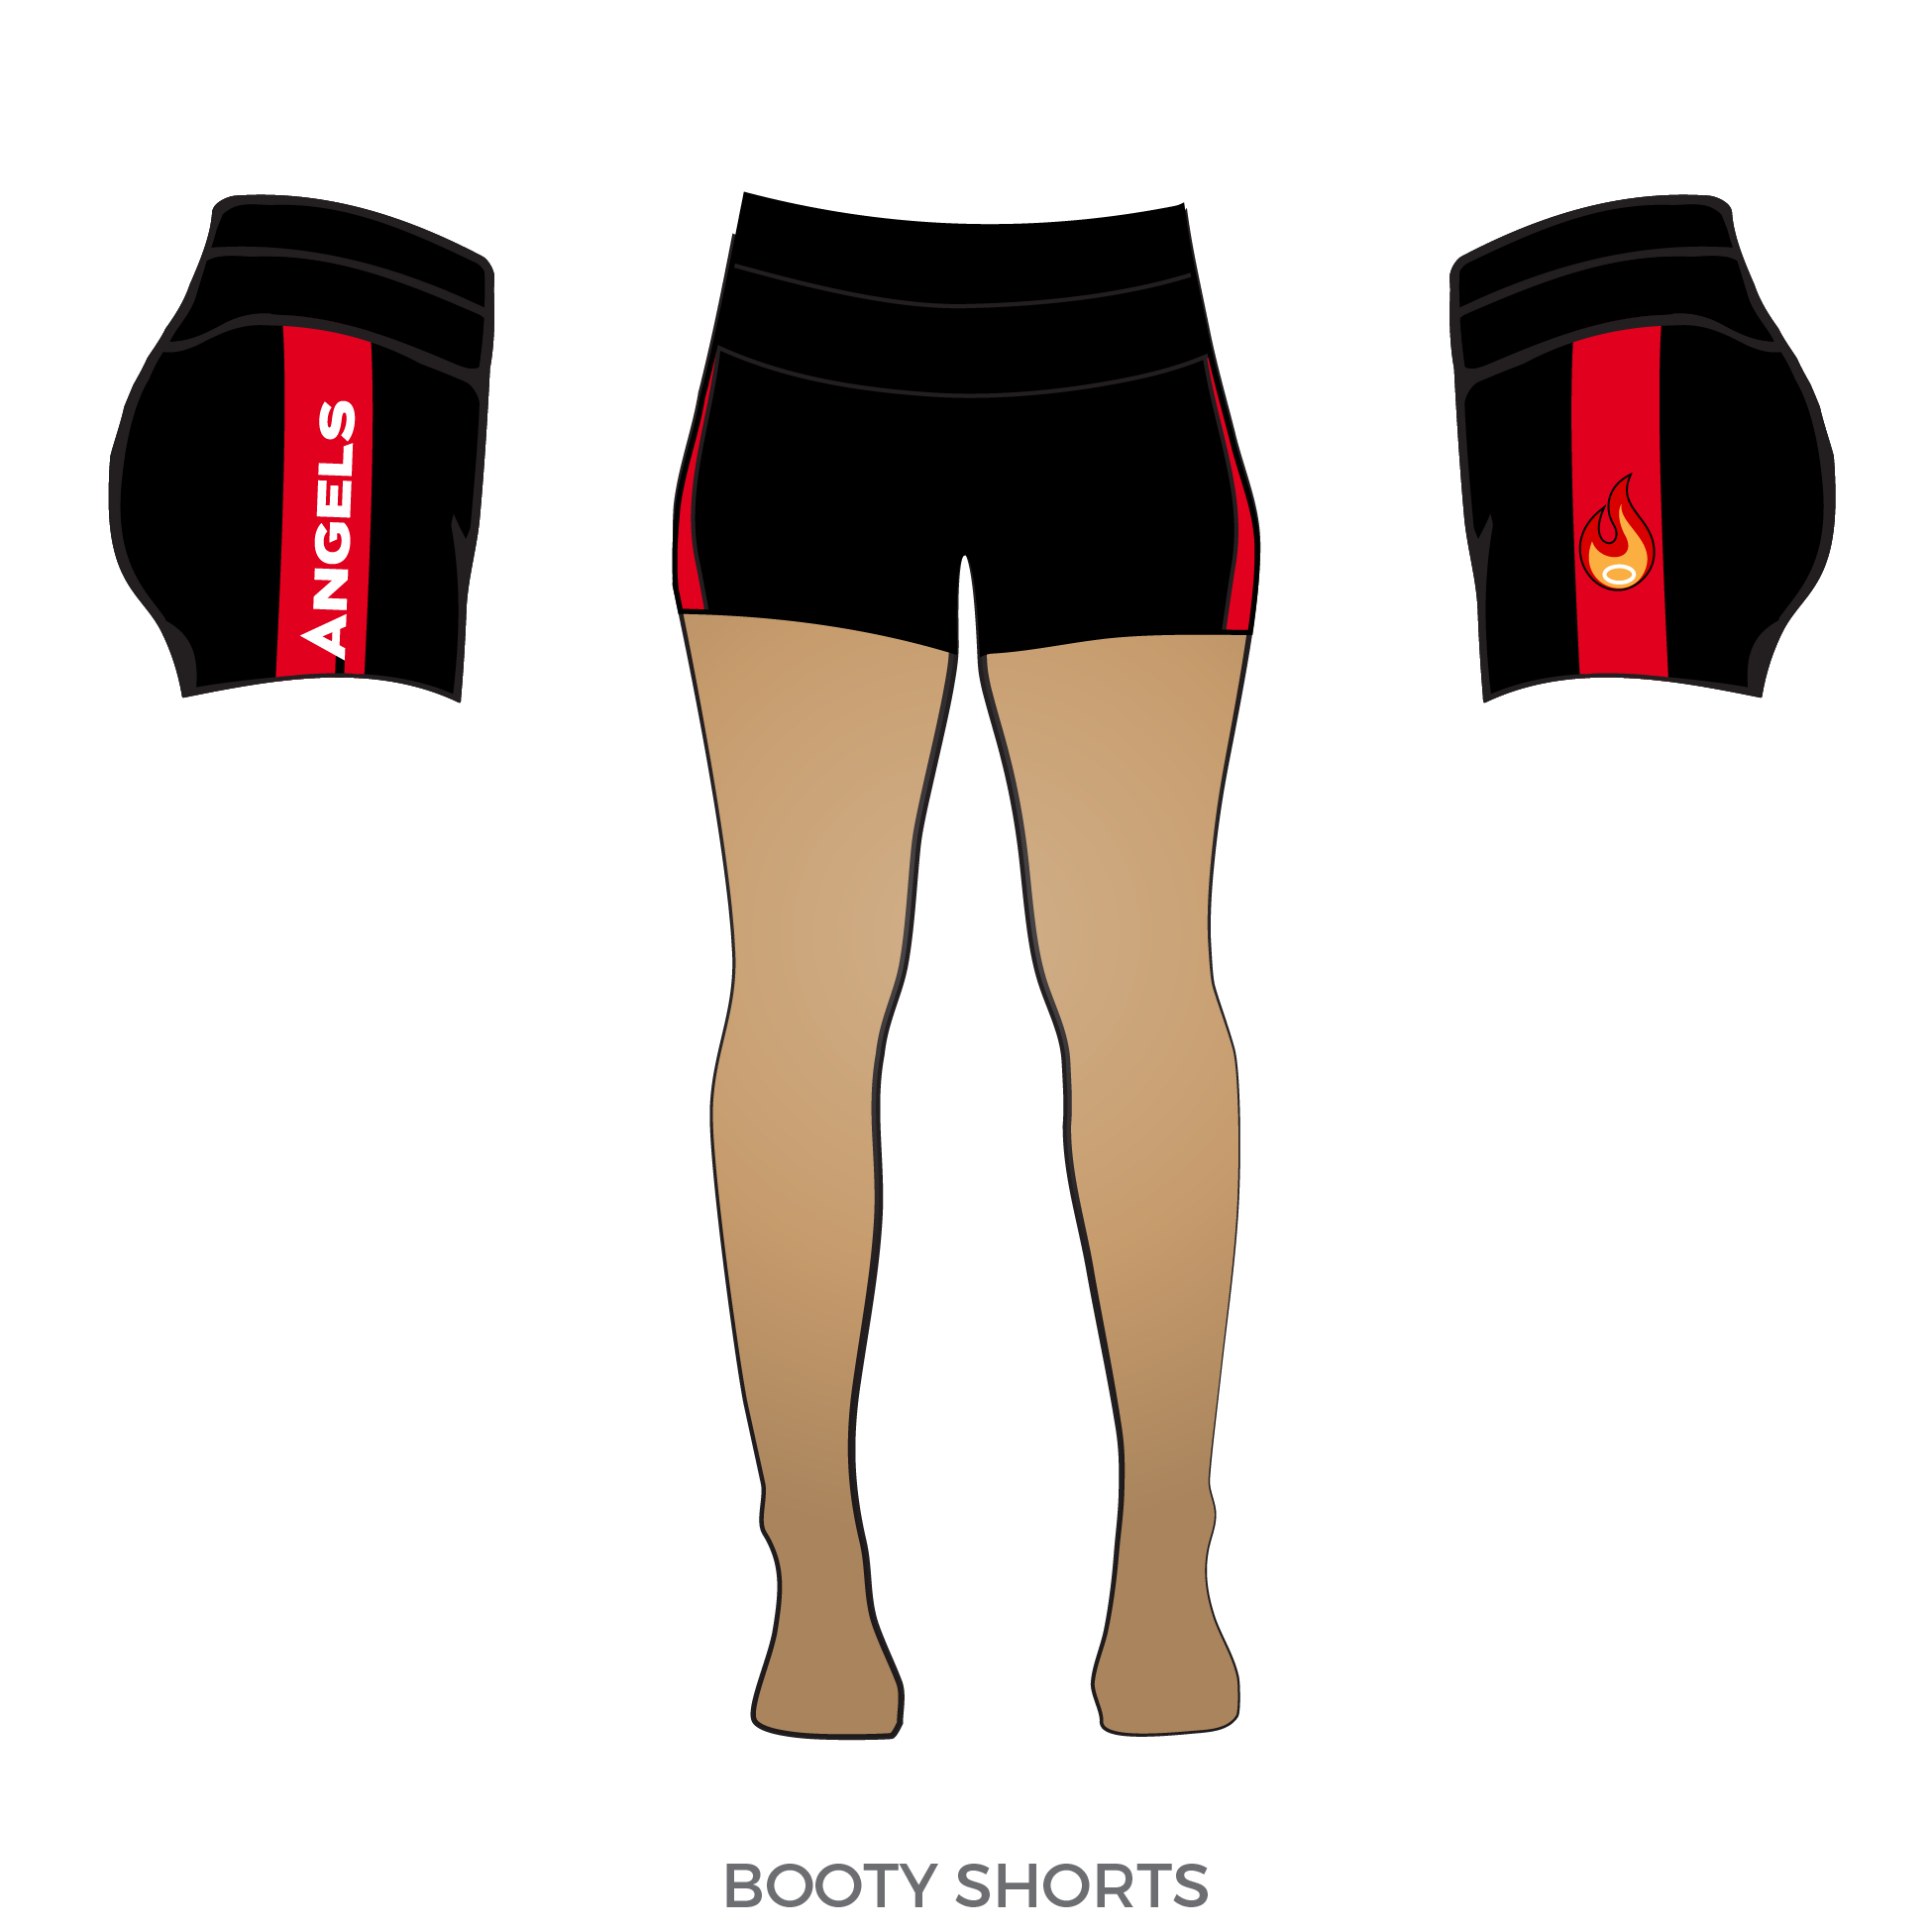 Seattle Derby Brats Evil Angels Uniform Shorts And Pants Frogmouth